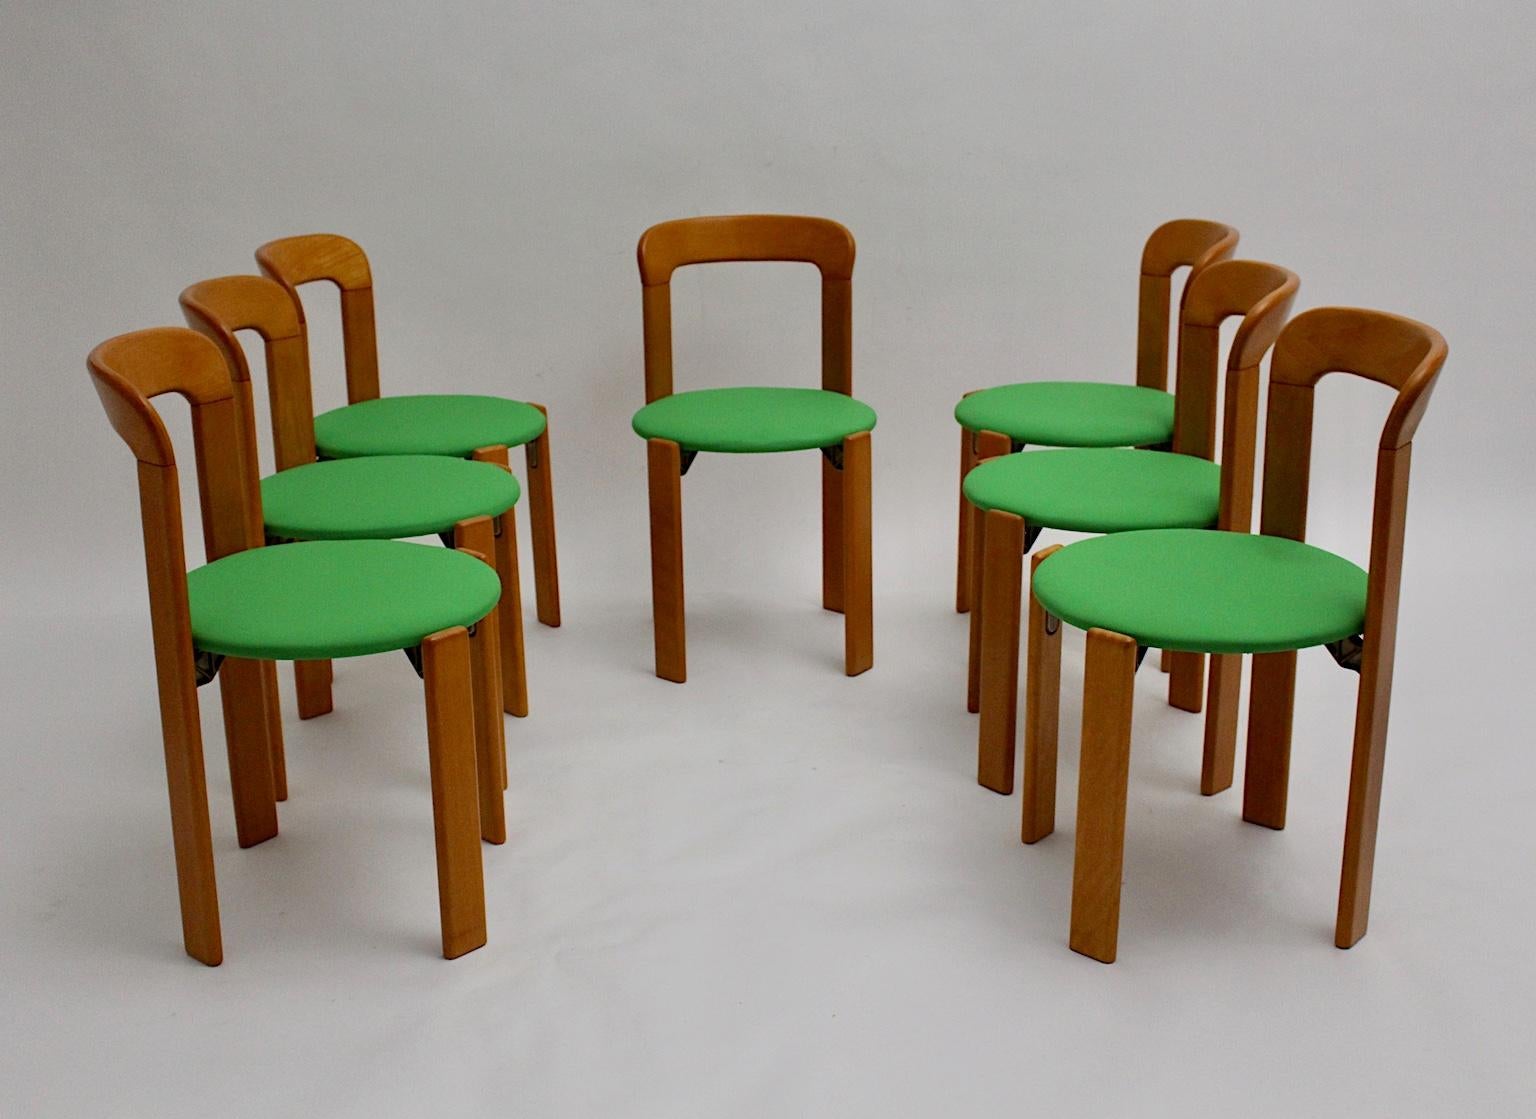 Beech Mid-Century Modern Set of Seven Brown Wood Dining Room Chairs by Bruno Rey 1970s